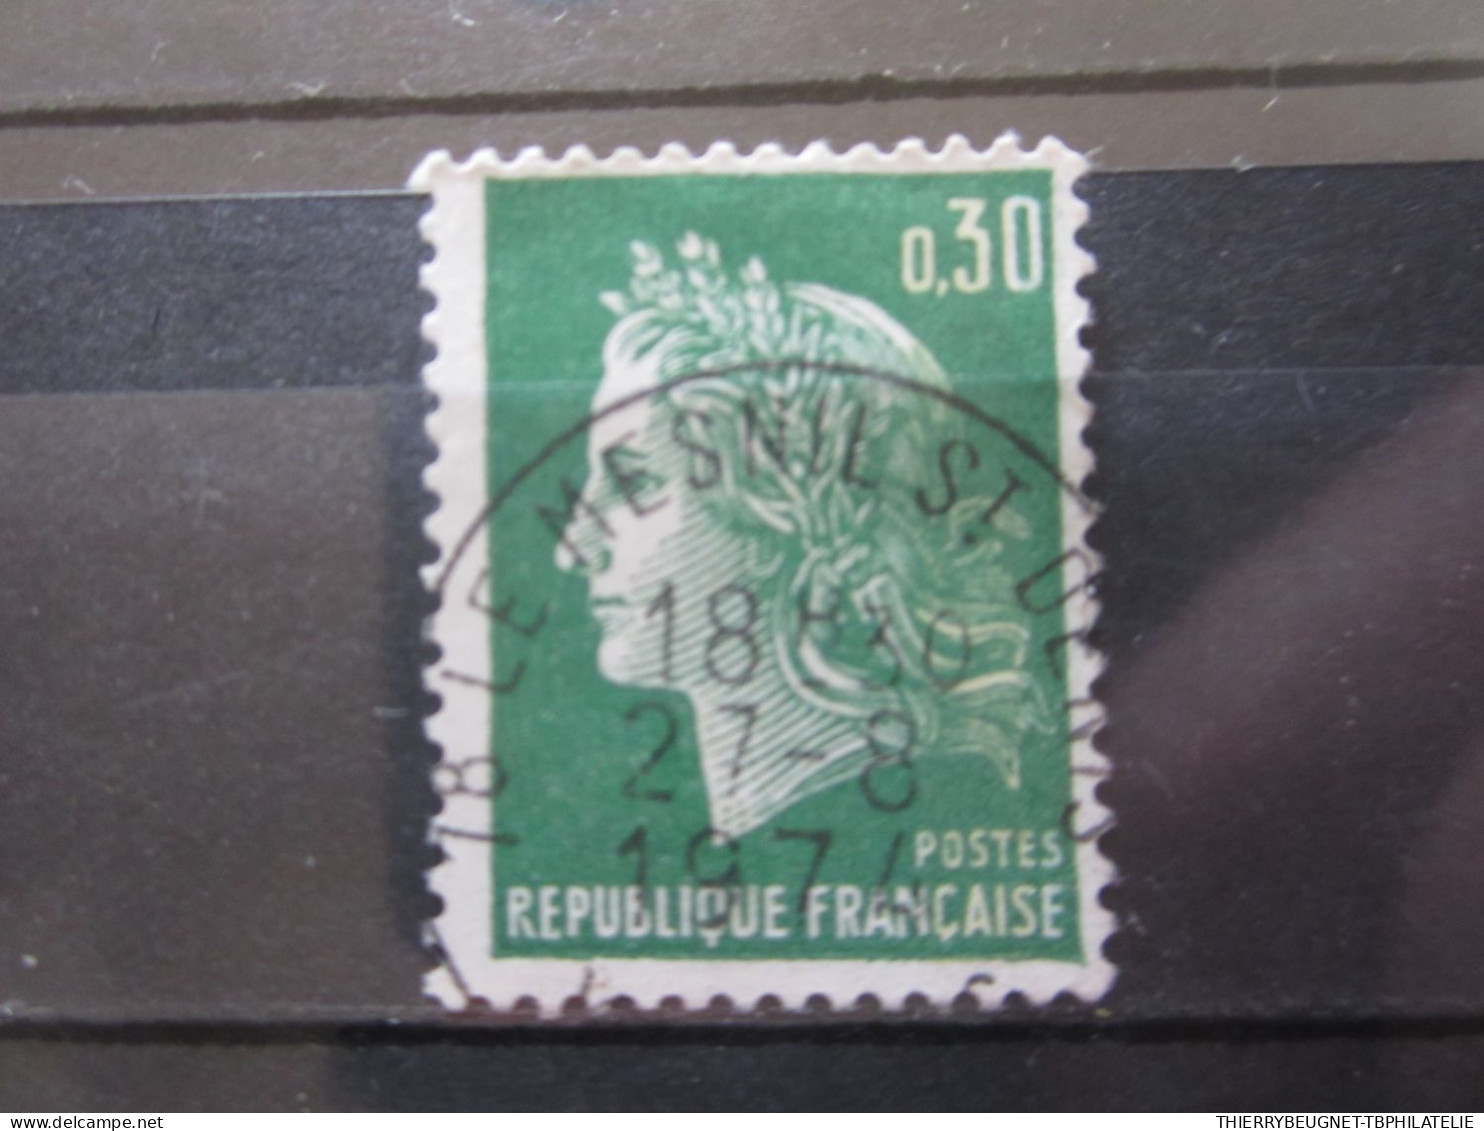 BEAU TIMBRE FRANCE N° 1611 - OBLITERATION LE MESNIL ST-DENIS - 1967-1970 Marianne Of Cheffer